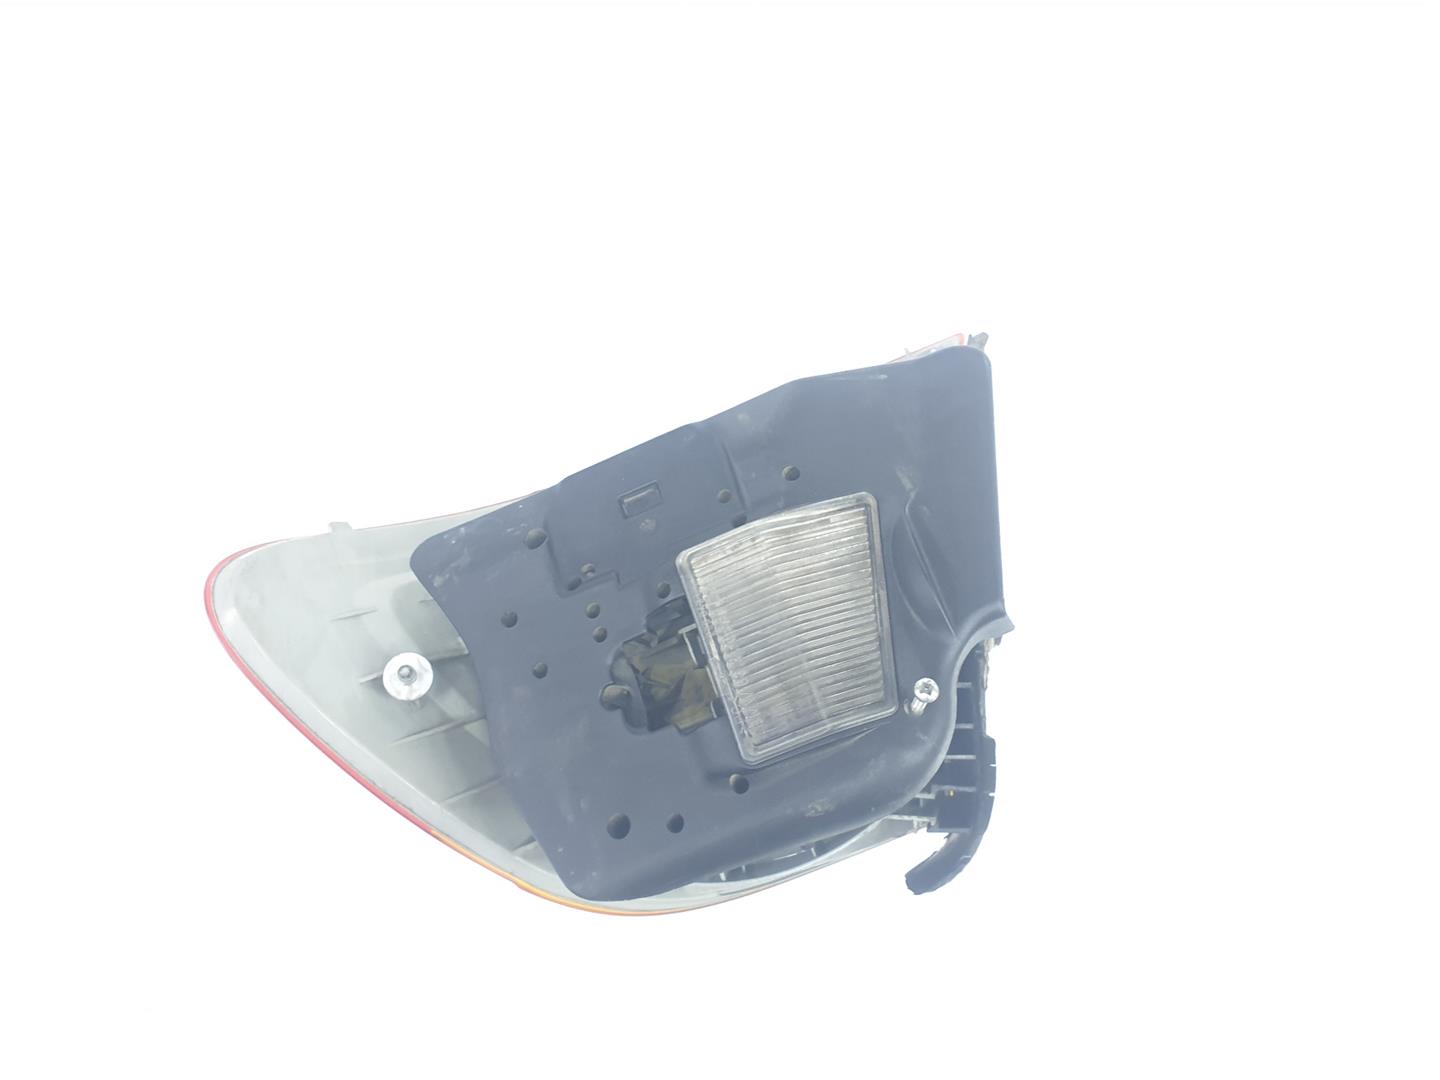 BMW 3 Series E46 (1997-2006) Rear Left Taillight 8364725, 63218364725 24245650